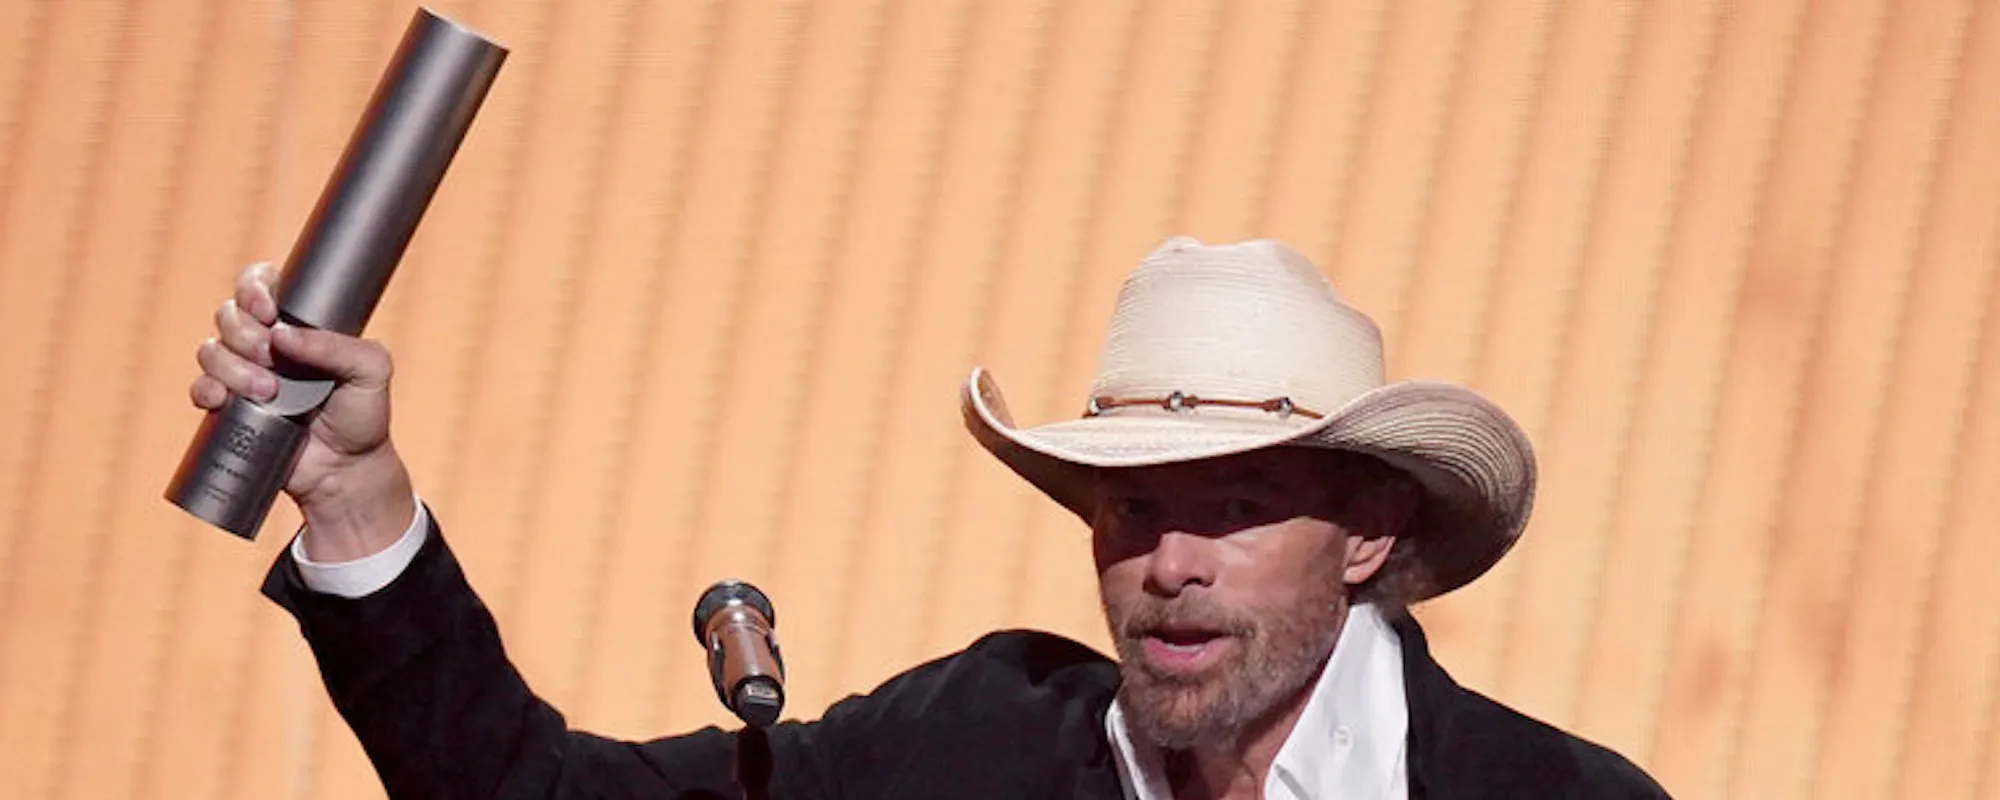 Toby Keith Updates His Health In Battle With Stomach Cancer – Deadline